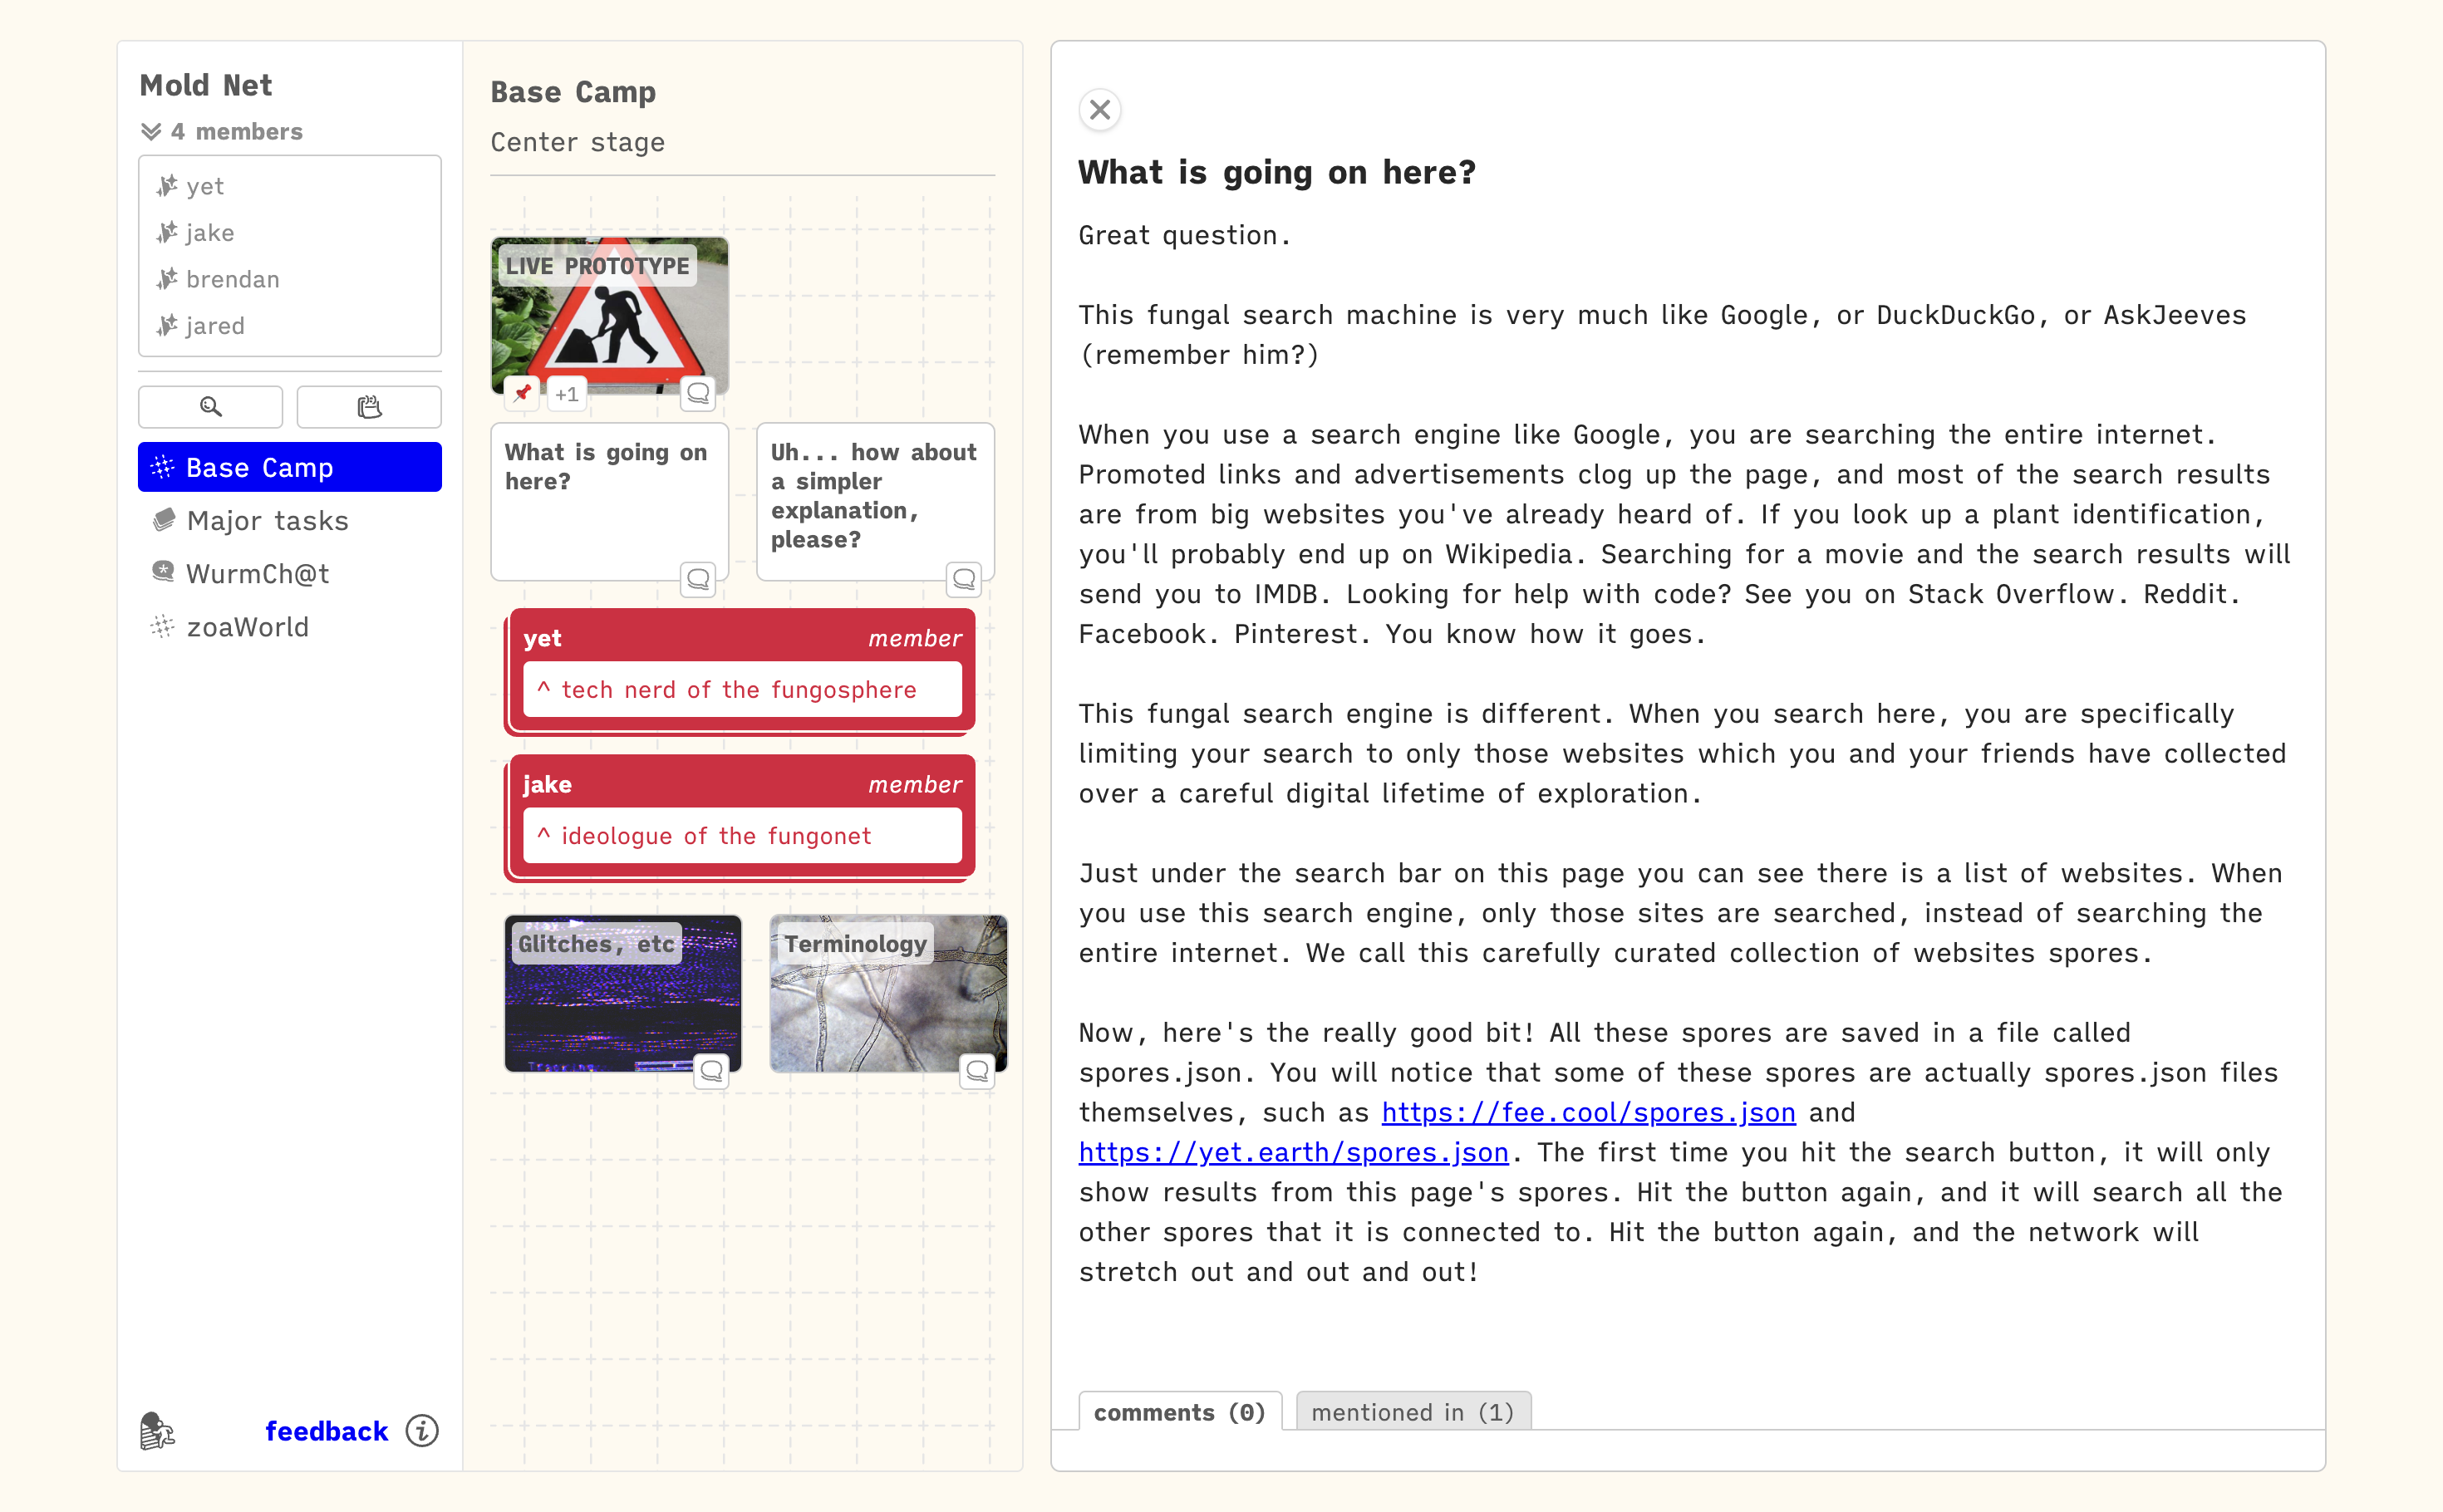 a screenshot of Moldnet, a Hyperlink Space in which two friends collaborate on building a new kind of search engine